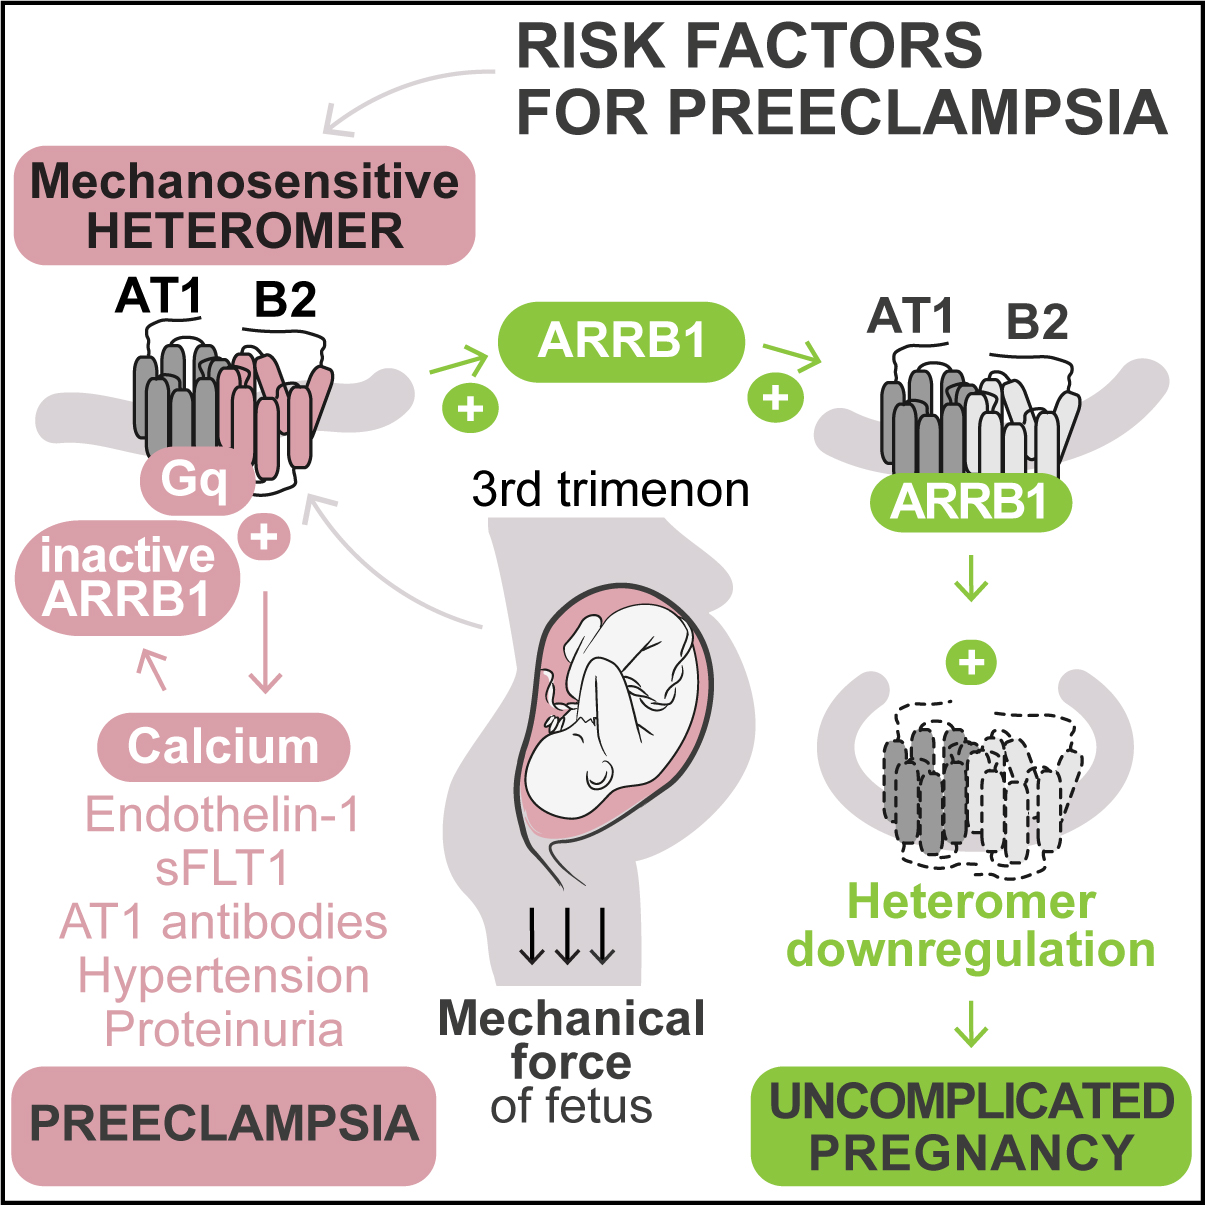 Enlarged view: Risk factors for preeclampsia